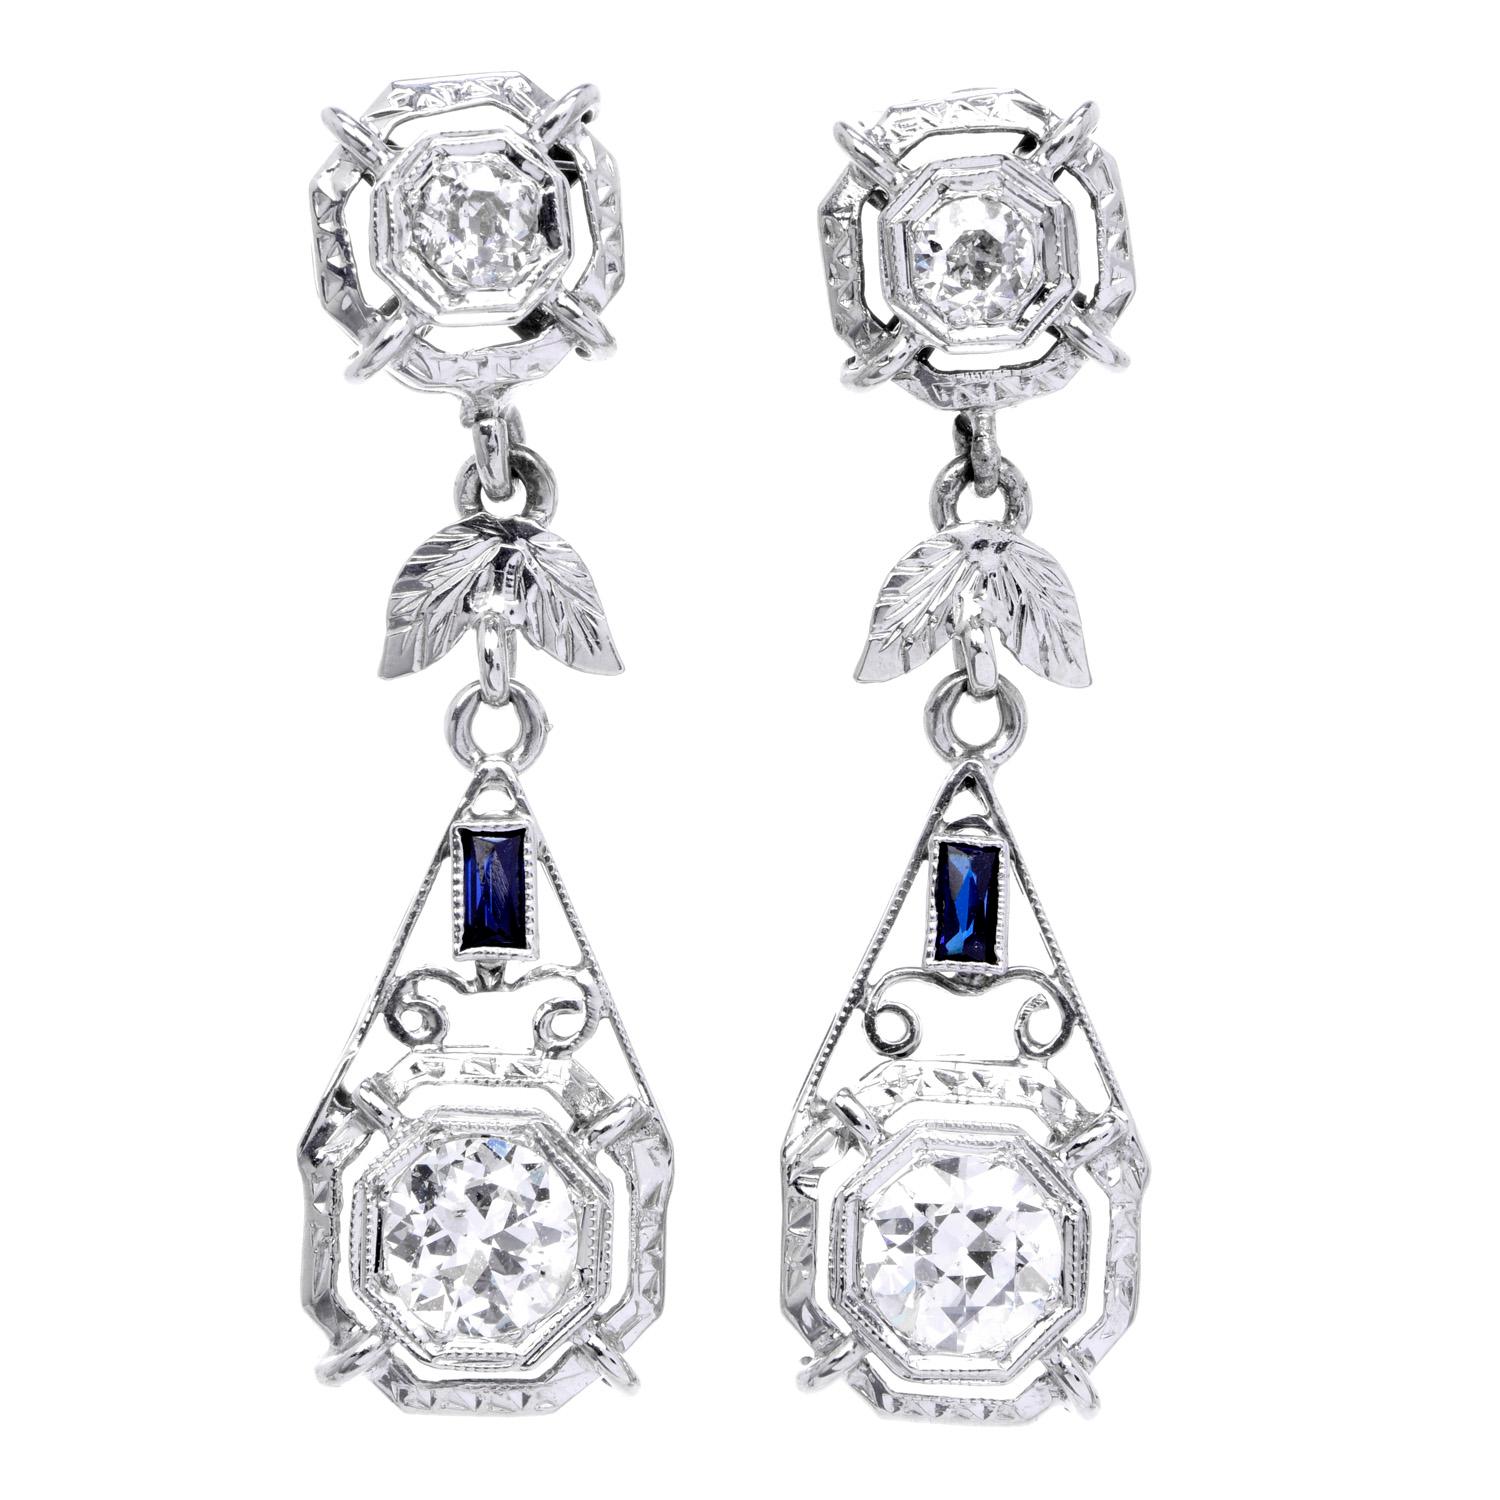 Antique Deco Floral inspired, dangle Drop Earrings!

These very sparkly Diamond earrings were crafted in luxurious Platinum.

With (4) European Round cut diamonds set into Octagonal shaped bezels, weighing approximately 1.15 carats (G-H color and SI